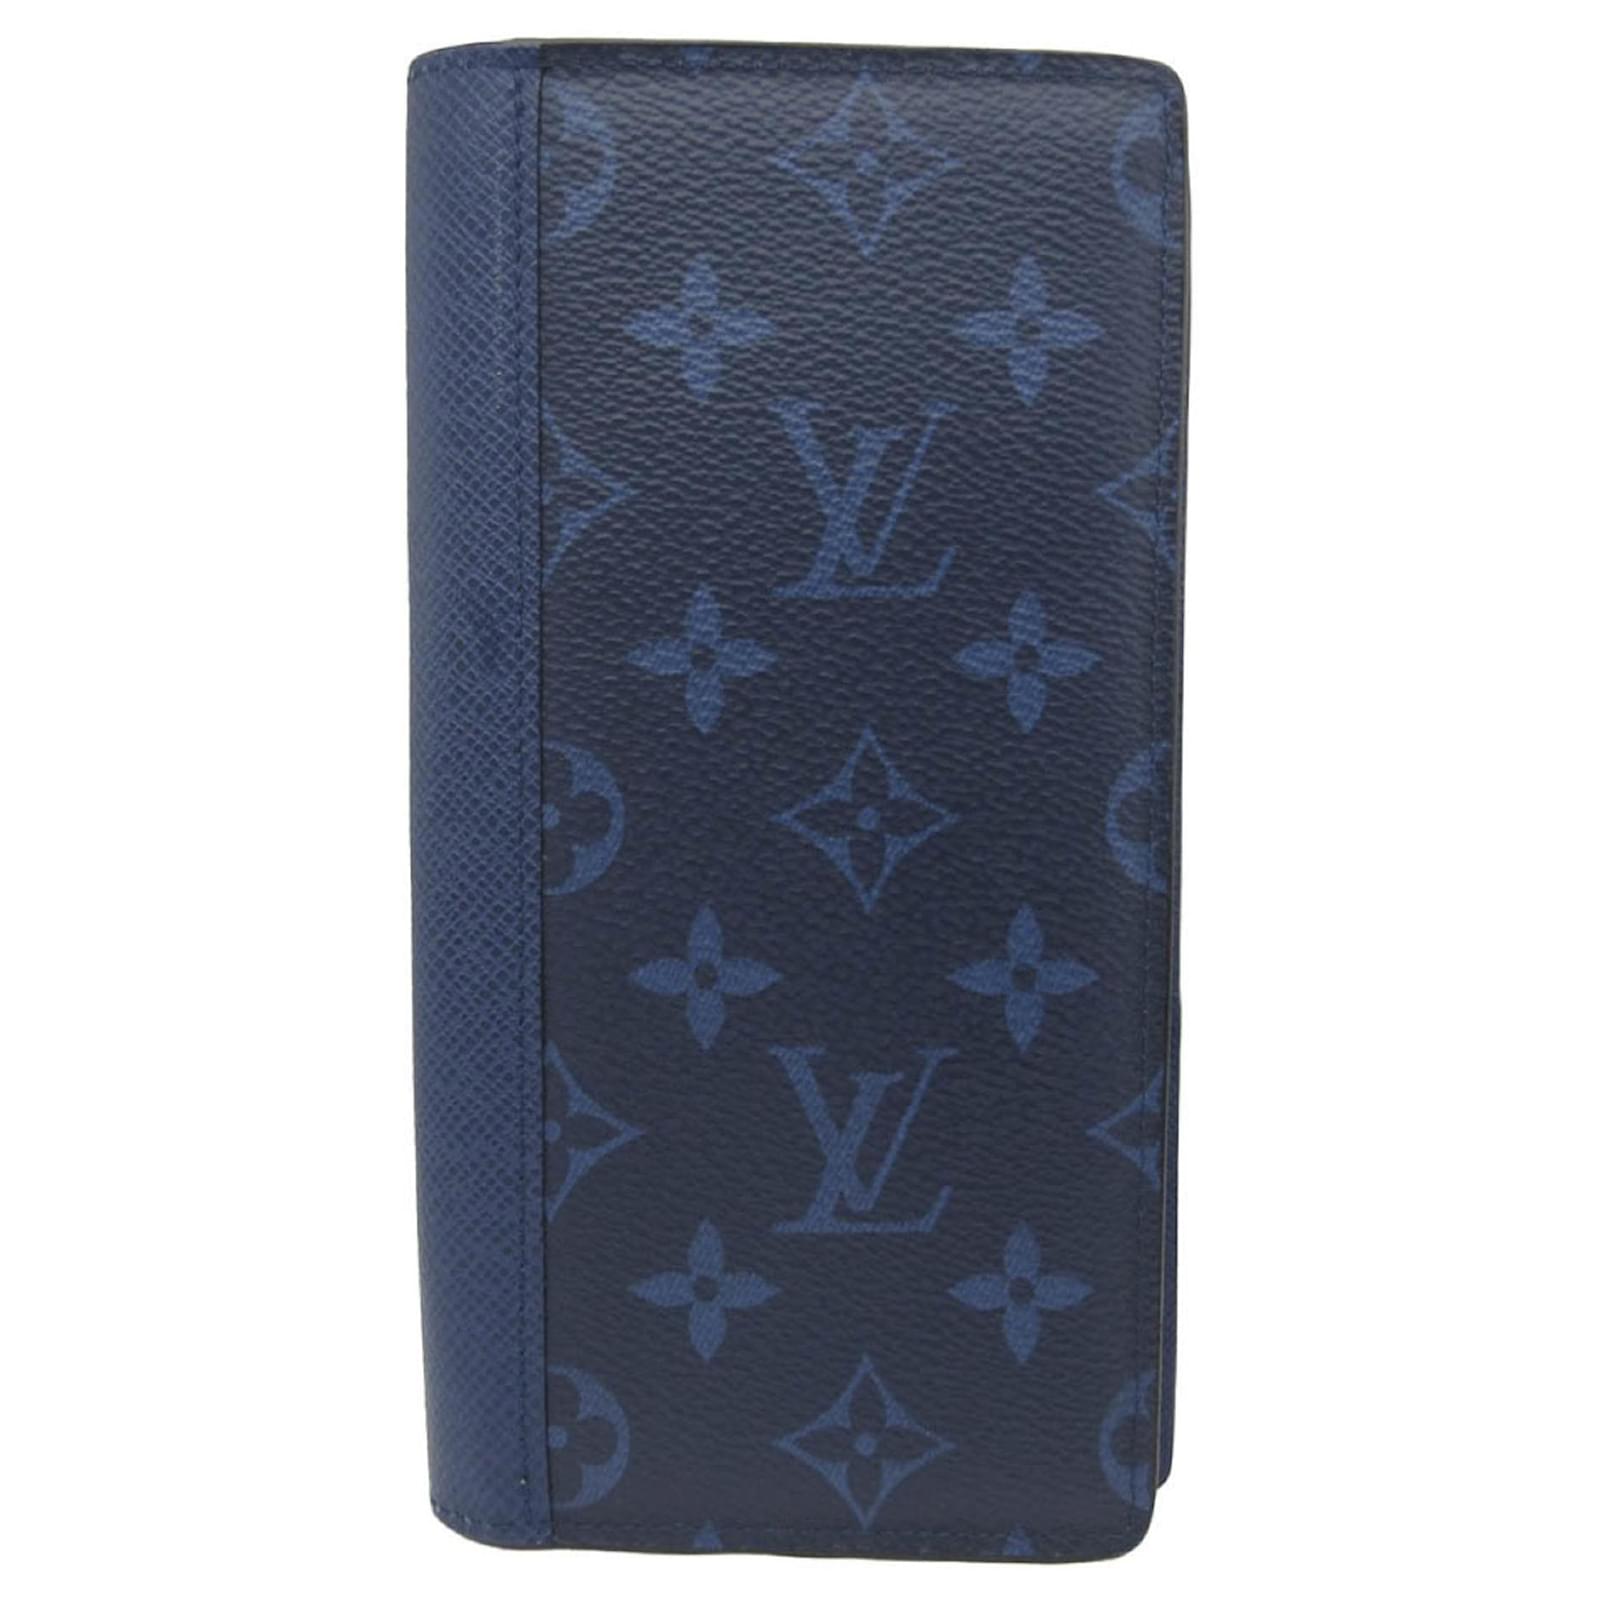 Brazza Wallet Monogram Eclipse - Wallets and Small Leather Goods